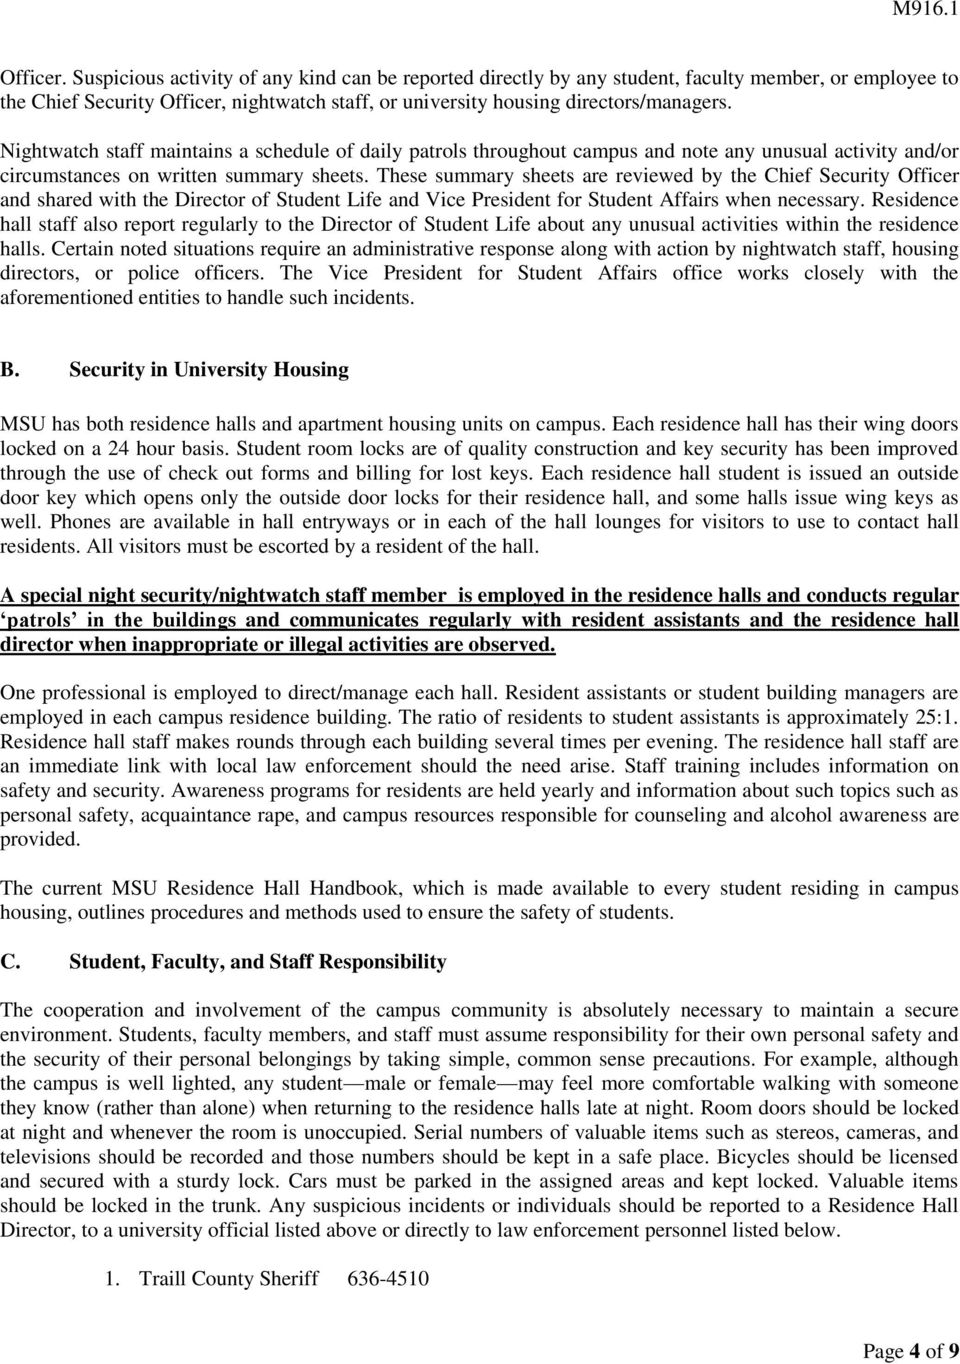 These summary sheets are reviewed by the Chief Security Officer and shared with the Director of Student Life and Vice President for Student Affairs when necessary.